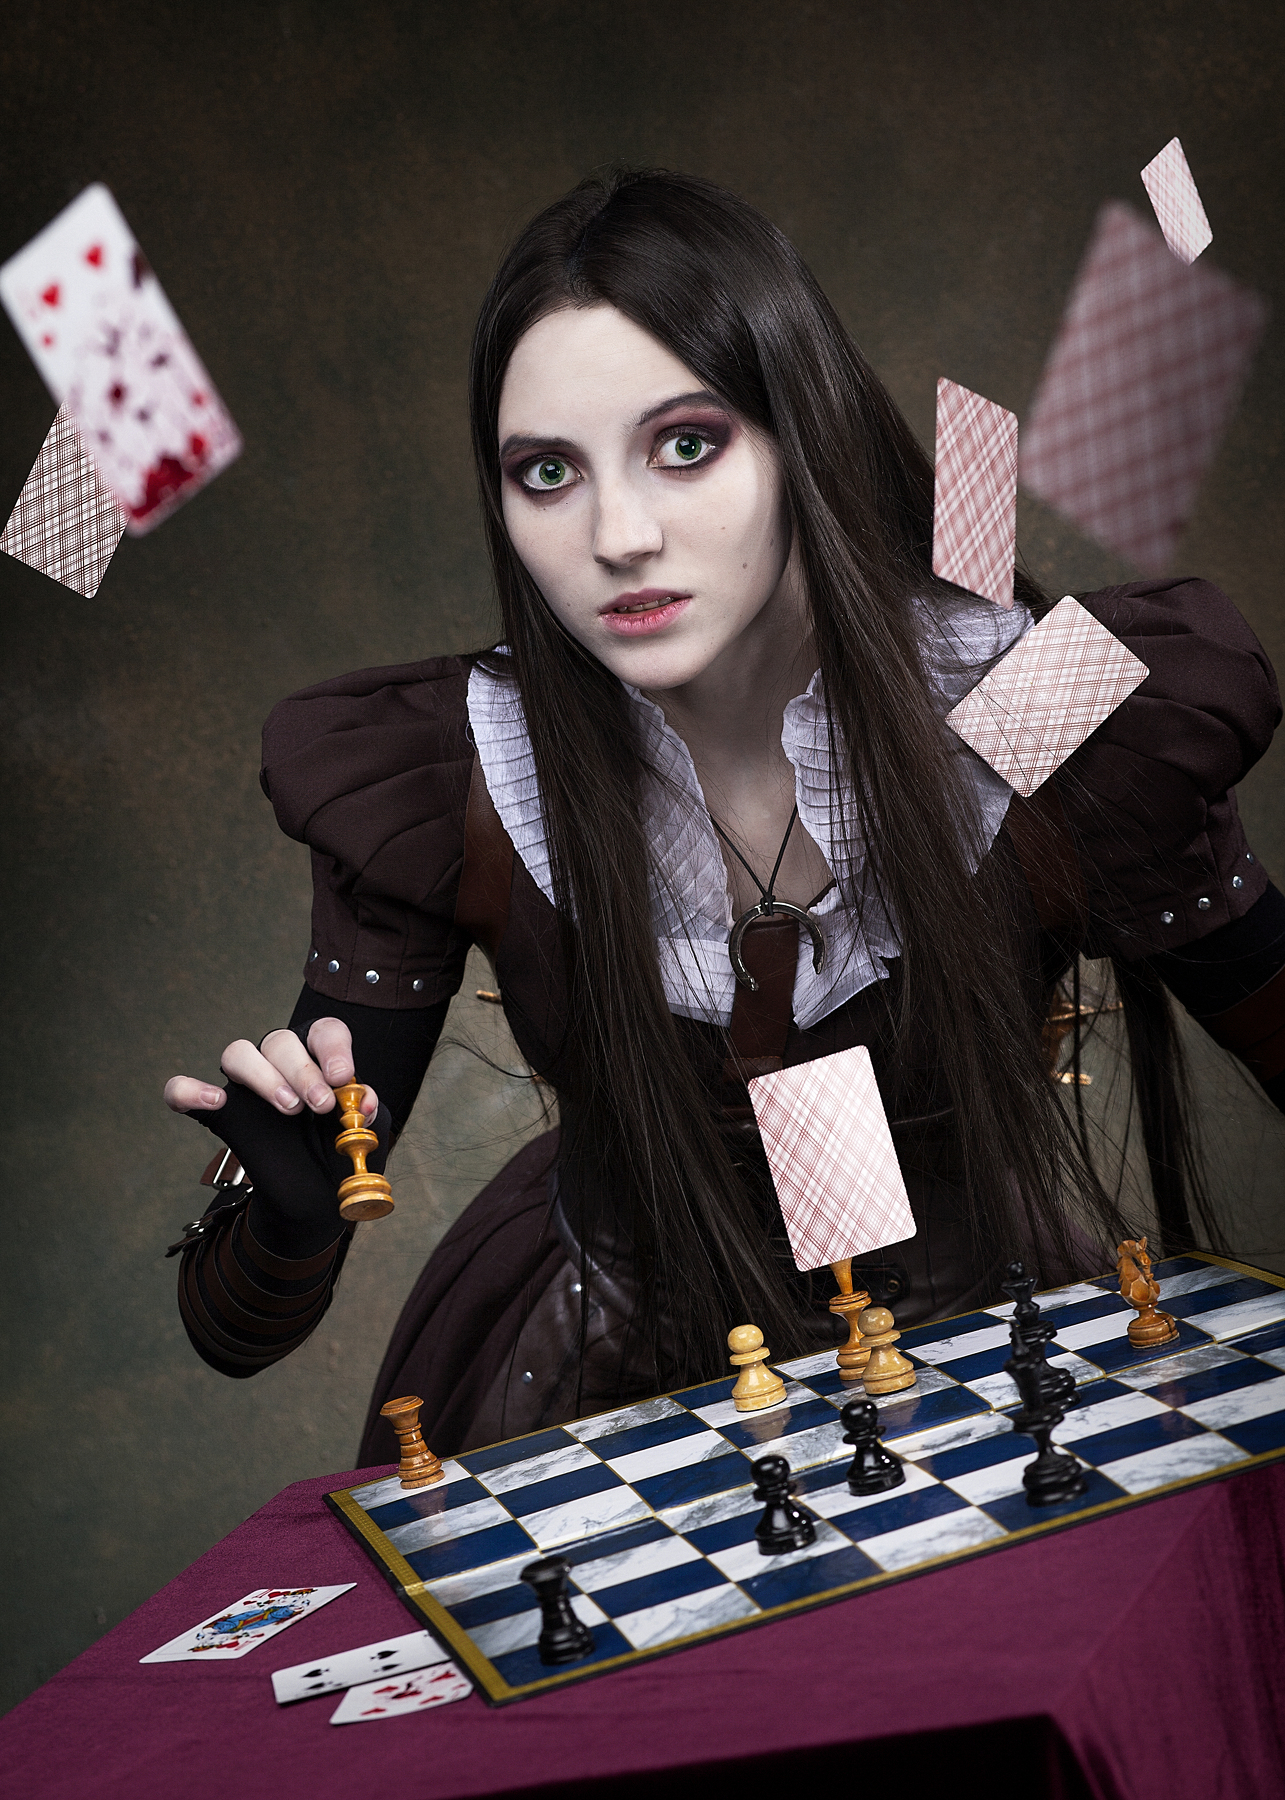 Chess Playing Cards Women Fantasy Girl Alice Through The Looking Glass American McGees Alice Cosplay 1285x1800